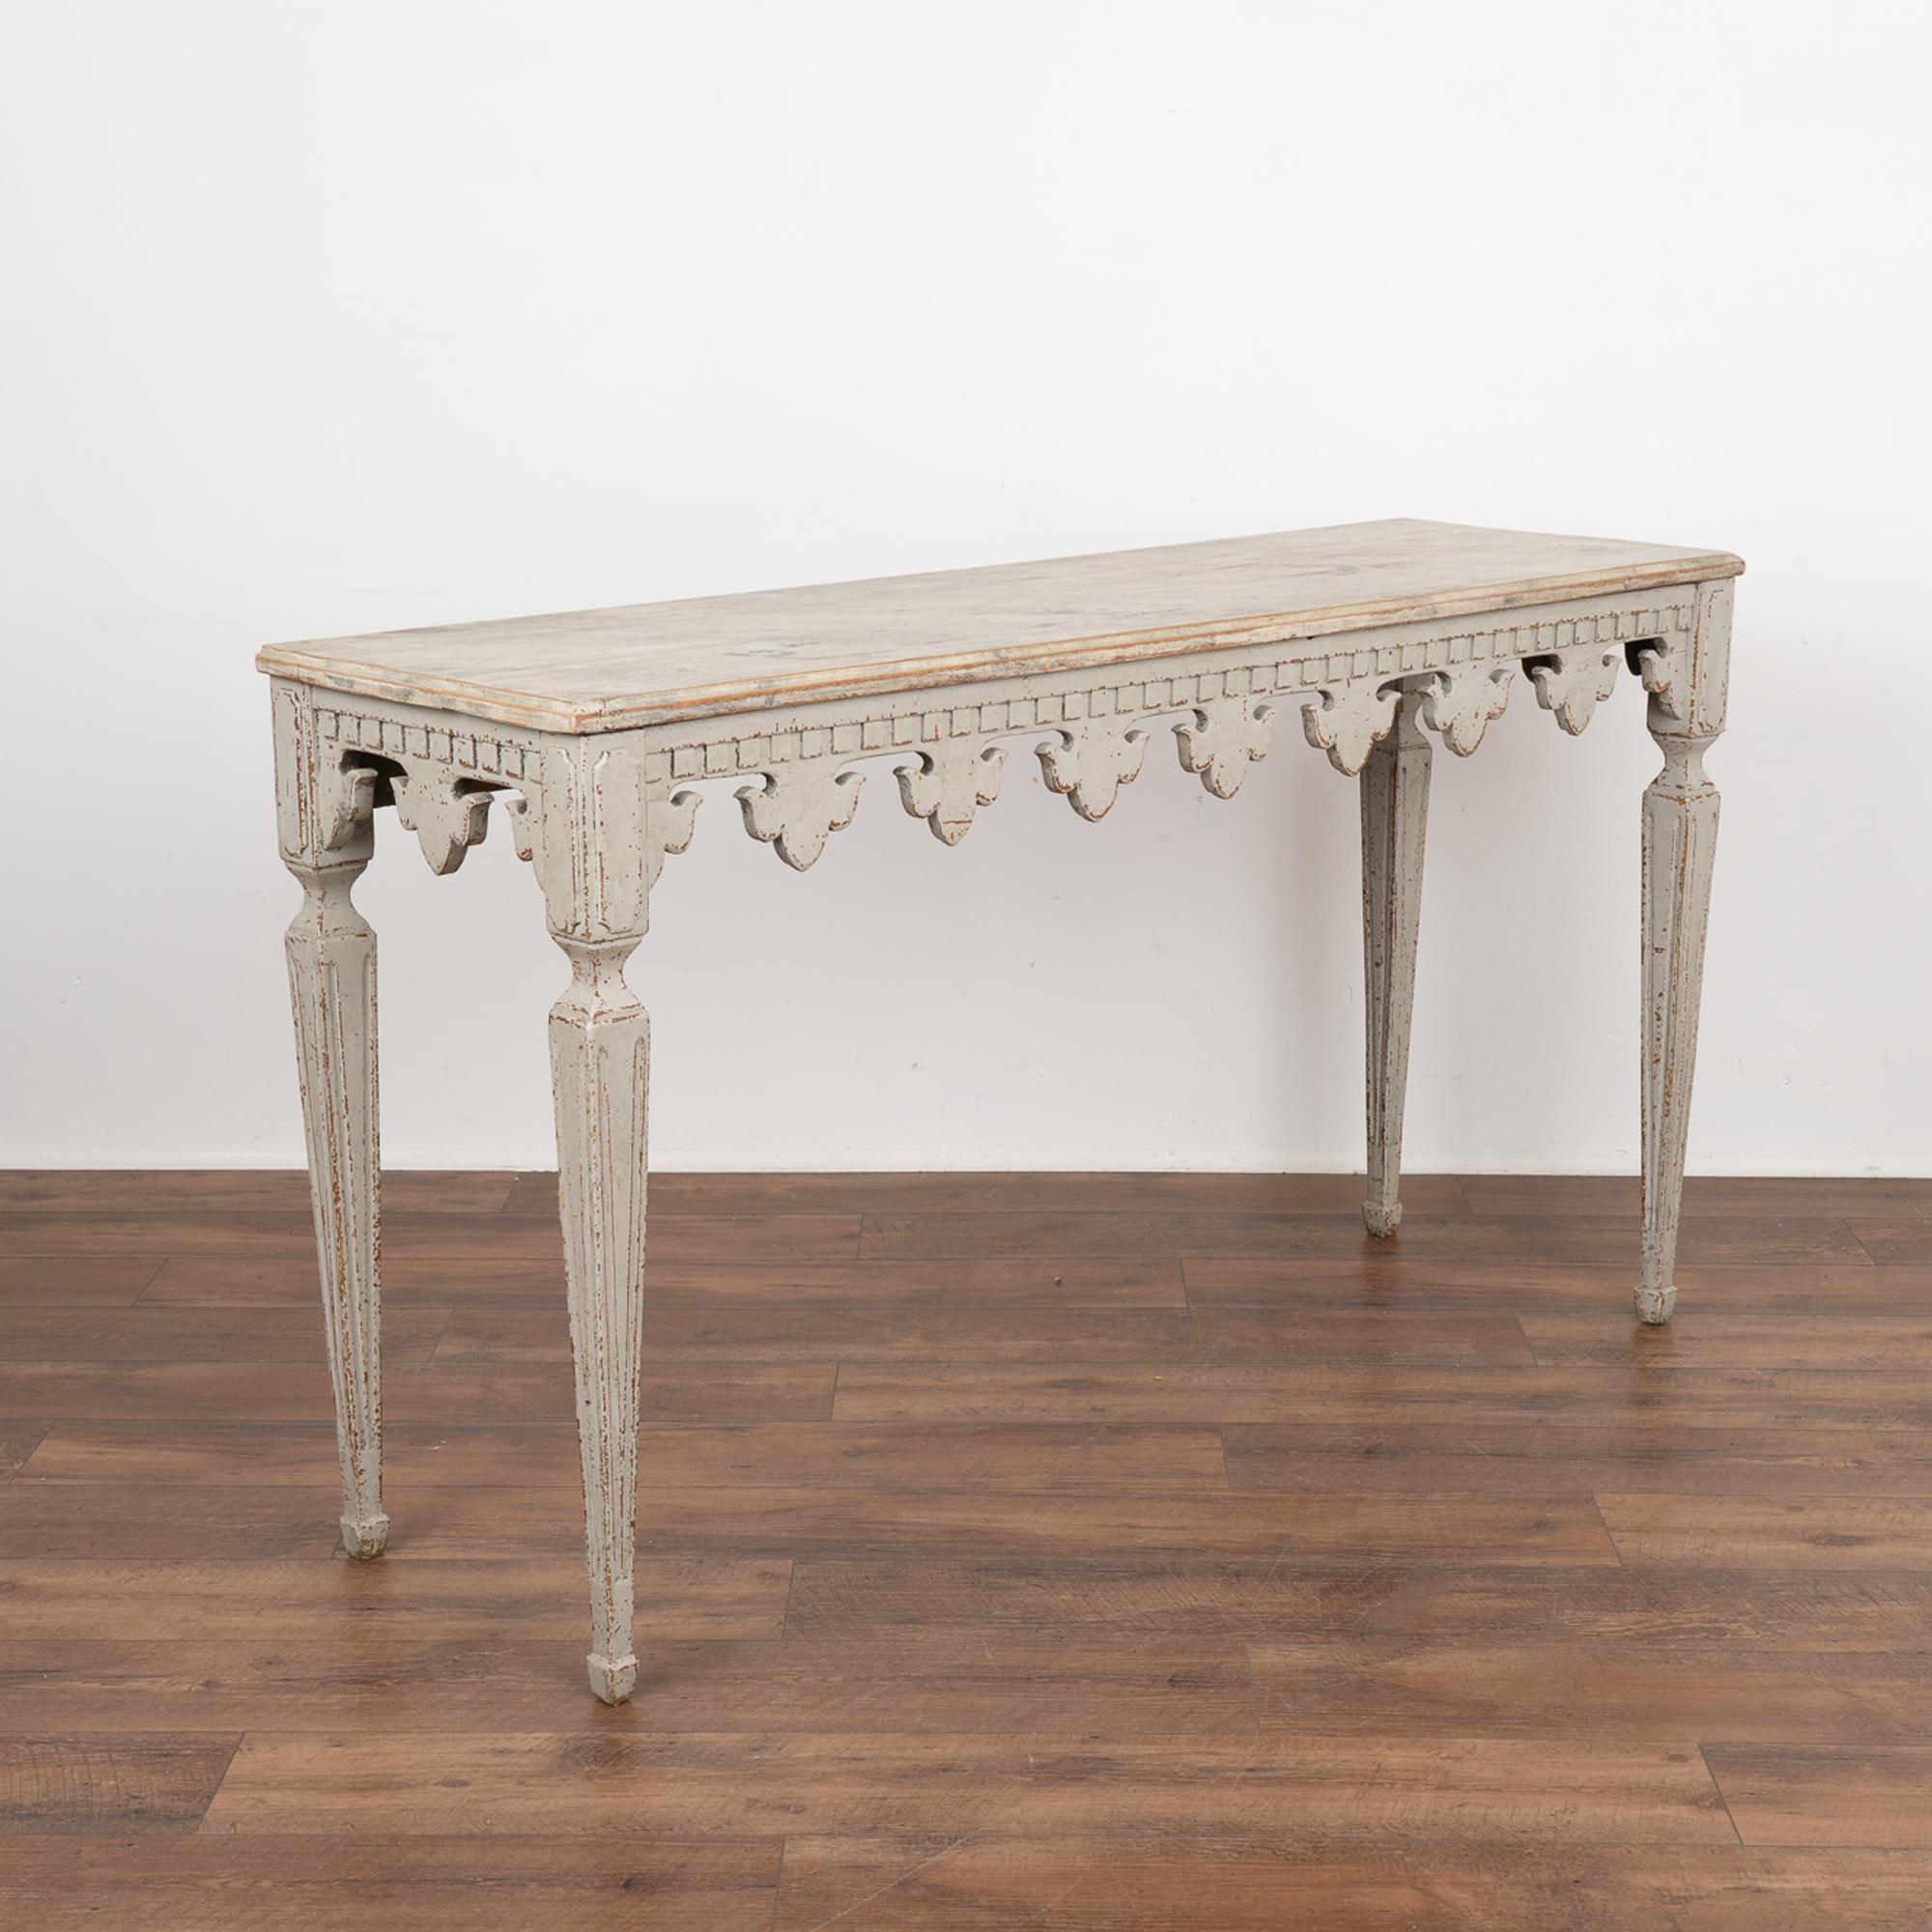 Elegant console table with carved fleur de lis skirt topped by dentil molding, raised on graceful tapered fluted legs.
Later applied professional painted finish in layers of gray with contrasting faux marble top. The finish has been lightly